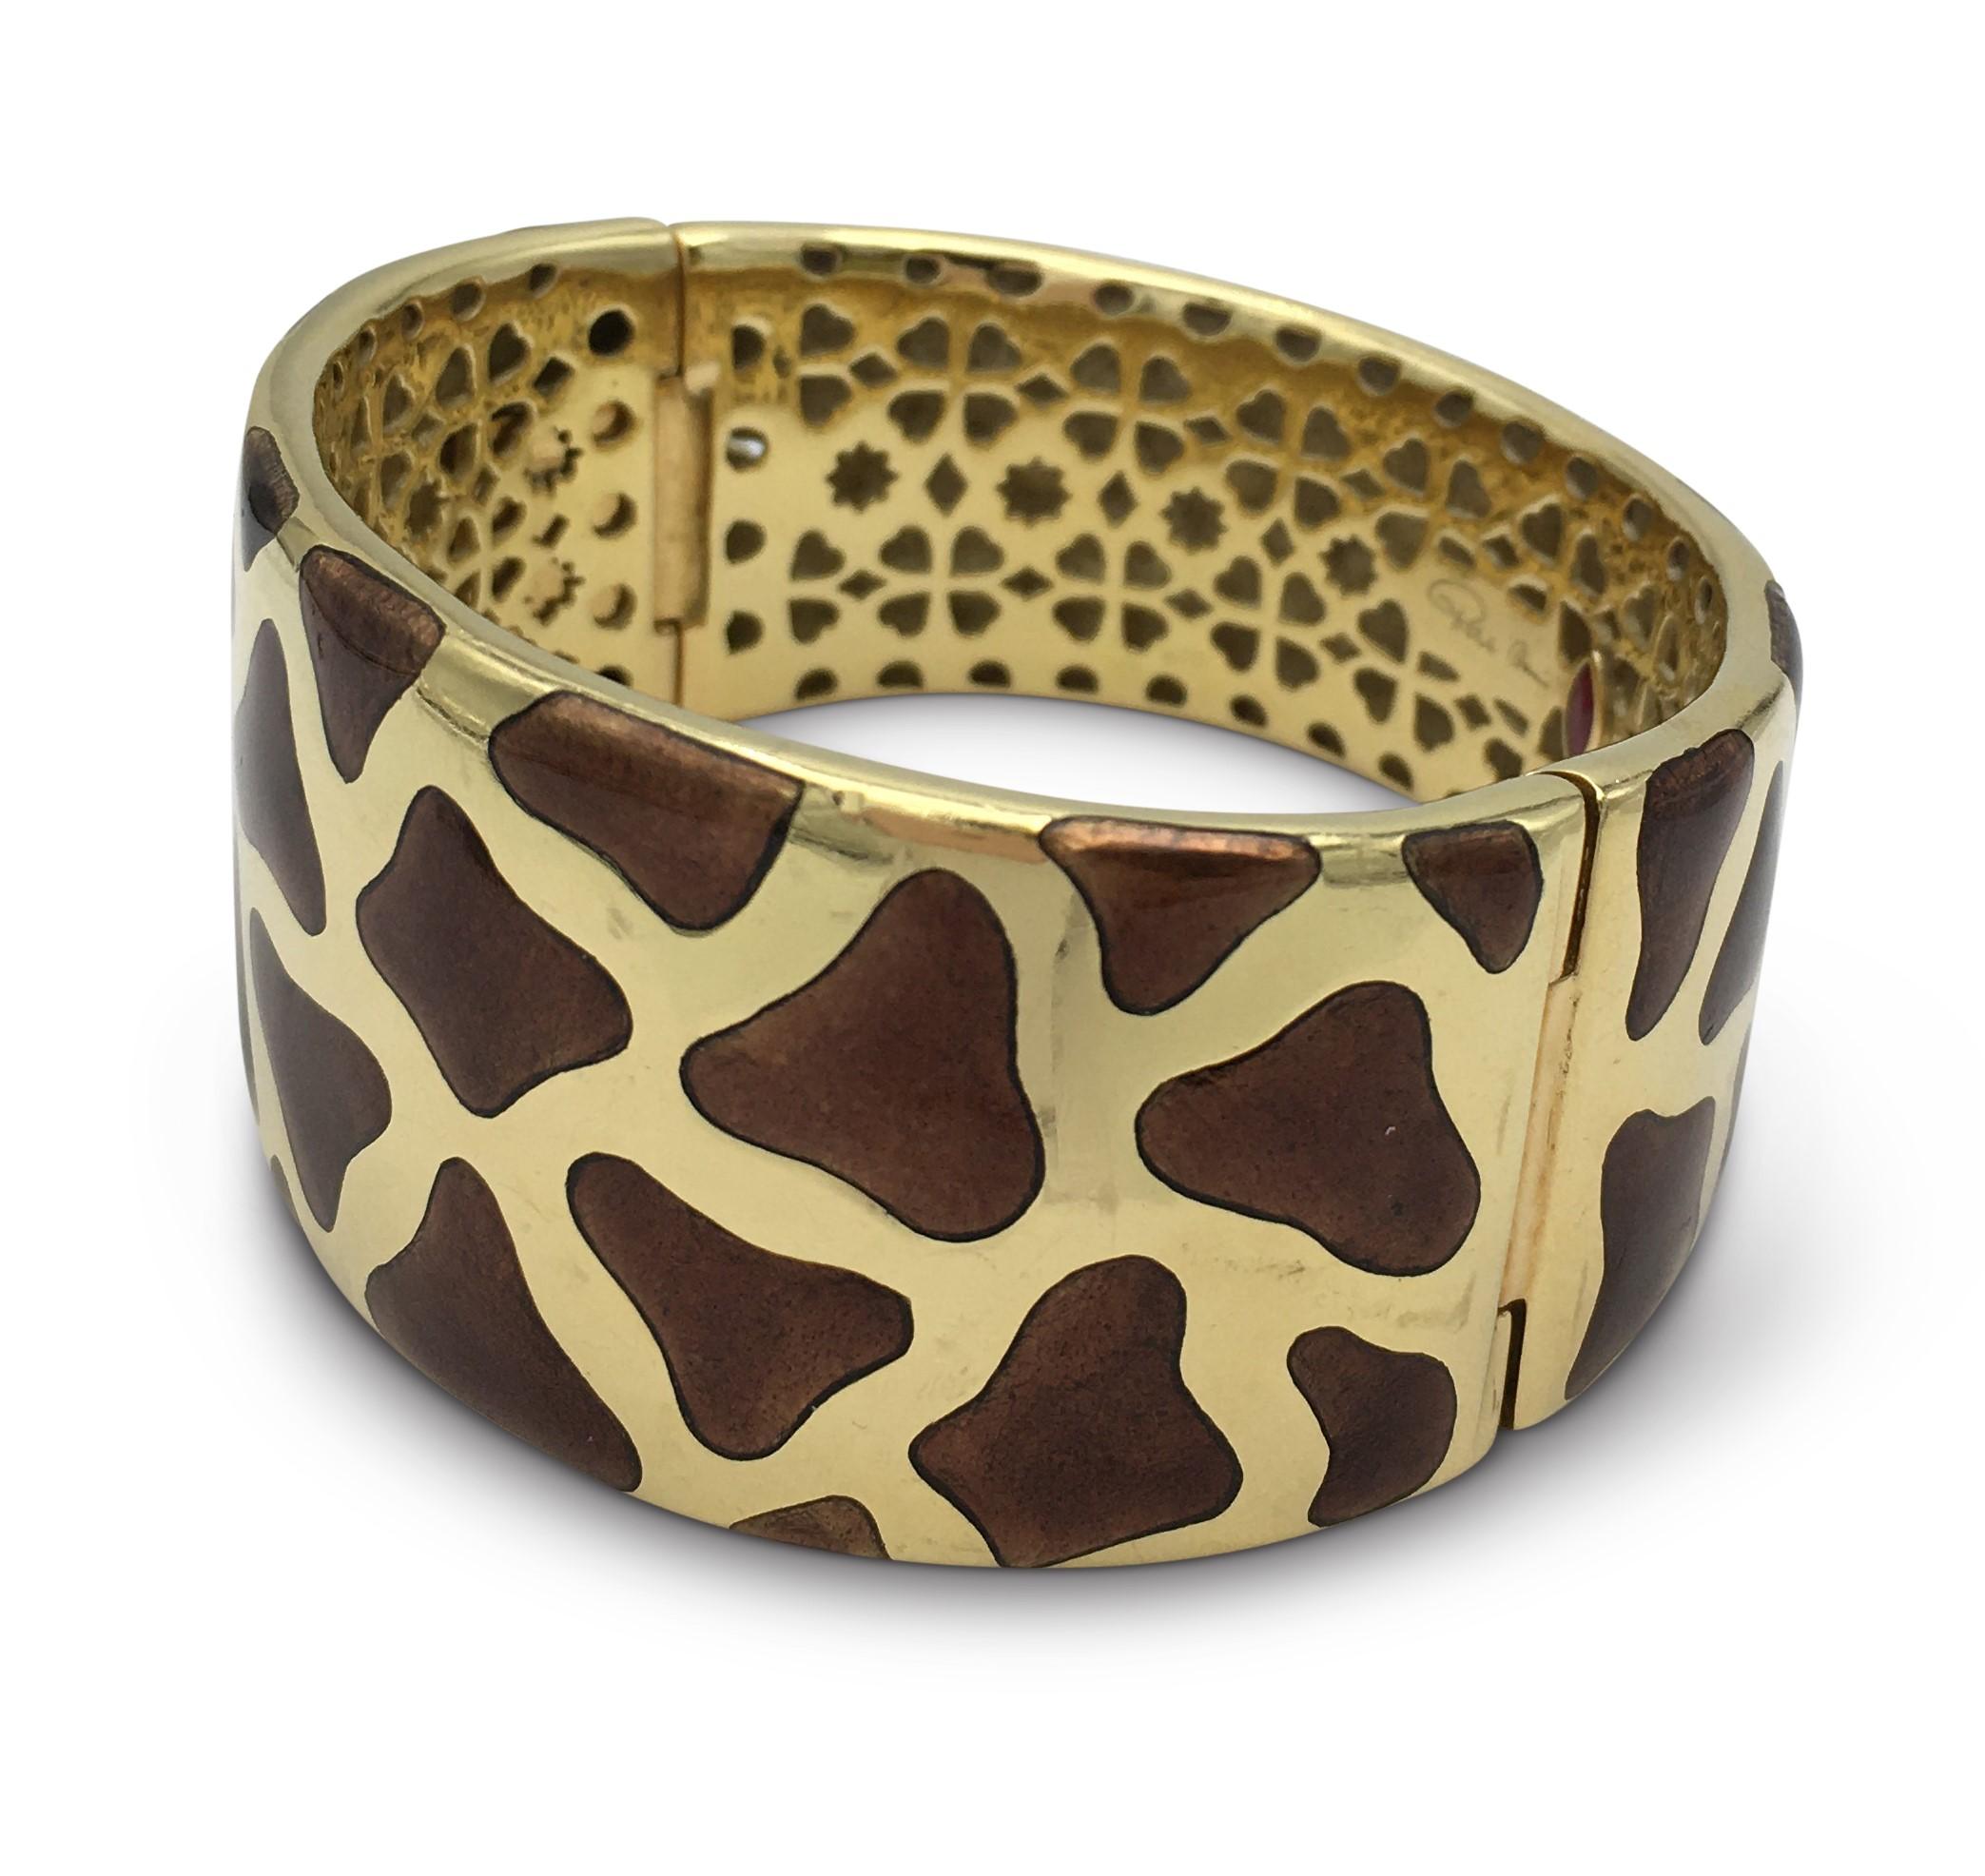 Authentic Roberto Coin bangle crafted in 18 karat yellow gold featuring brown enamel inlay resembling that of a giraffe. Hinge bracelet fits up to a 6 1/2 inch wrist comfortably. Tapered width of 1 1/4